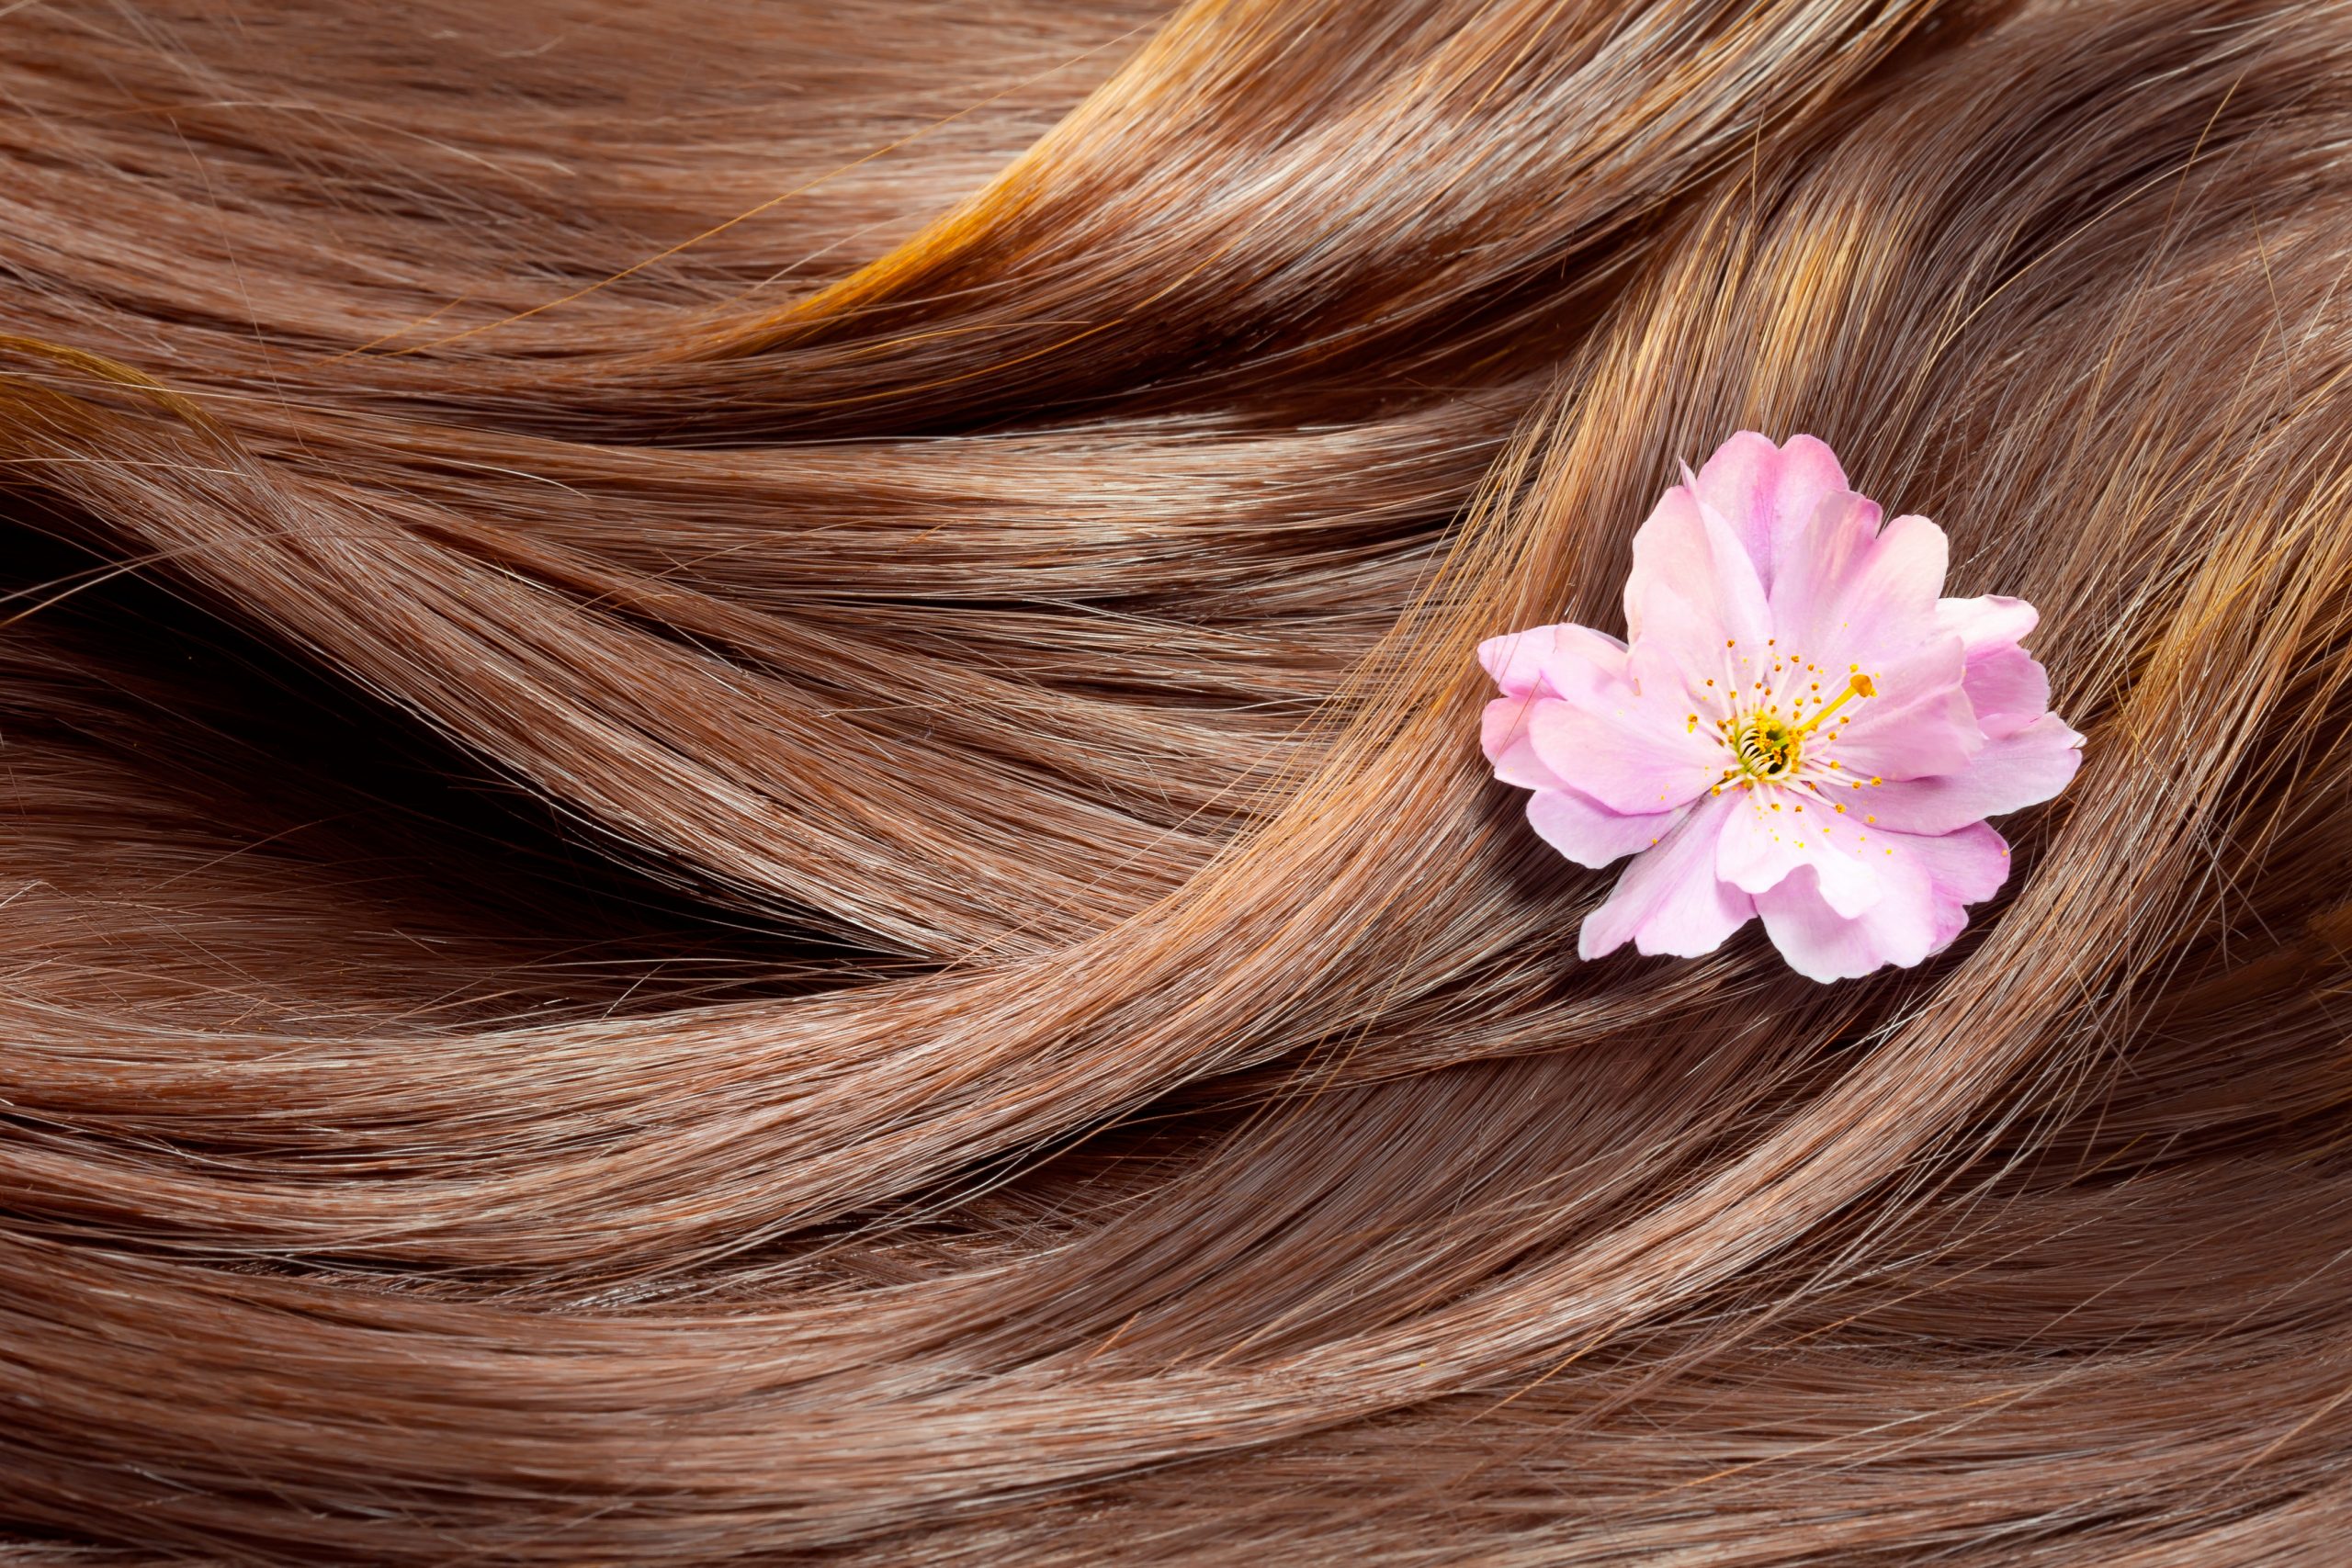 Manage your Dry Hair with Natural Products